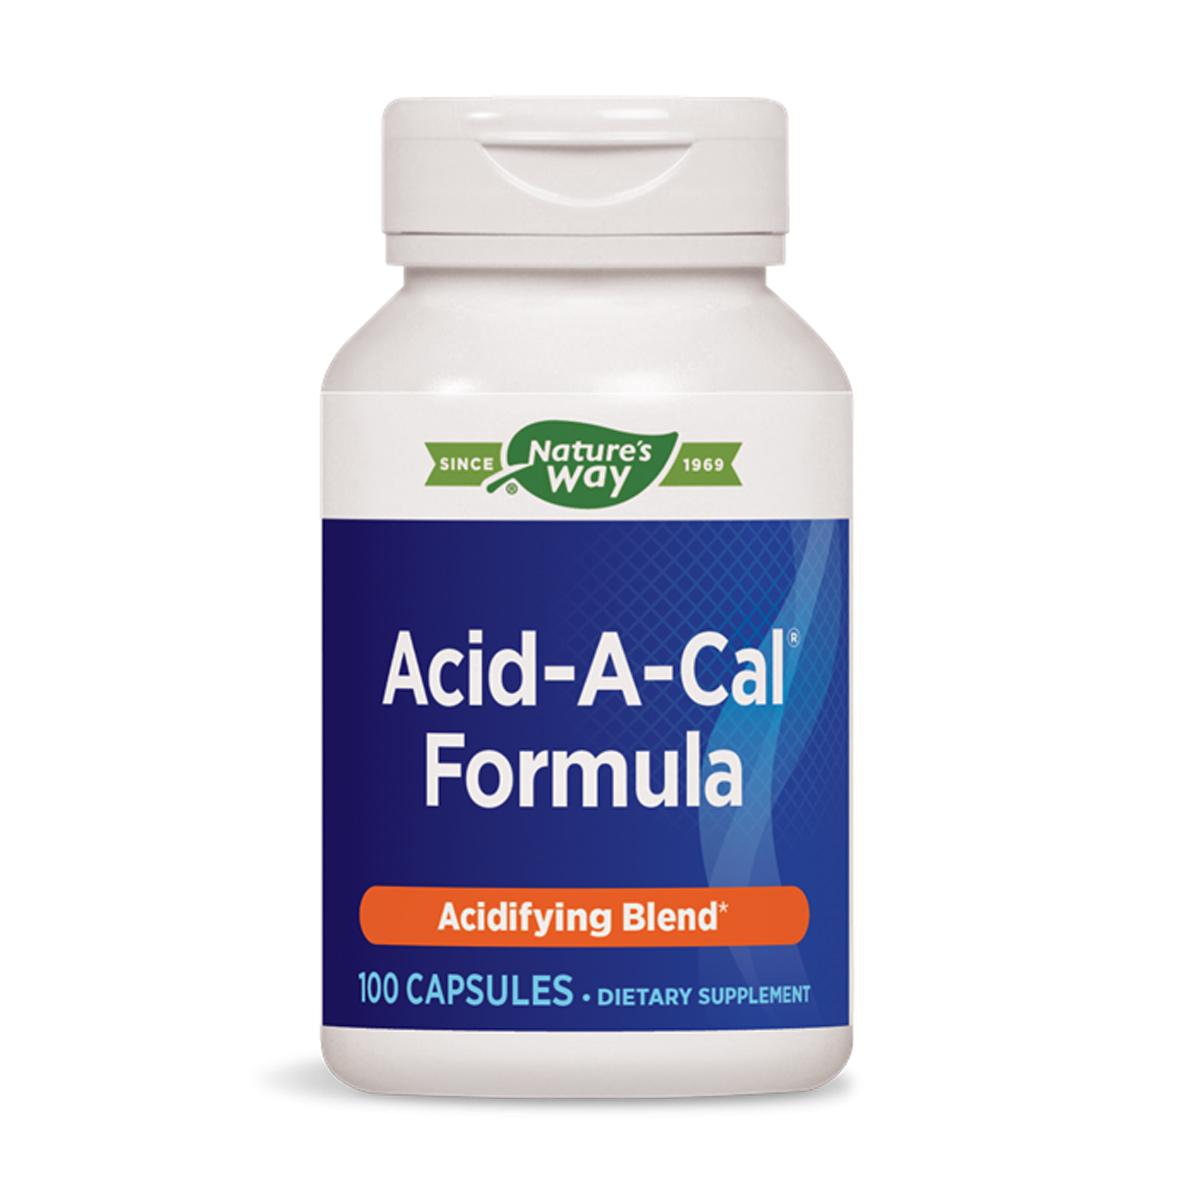 Primary image of Acid-A-Cal